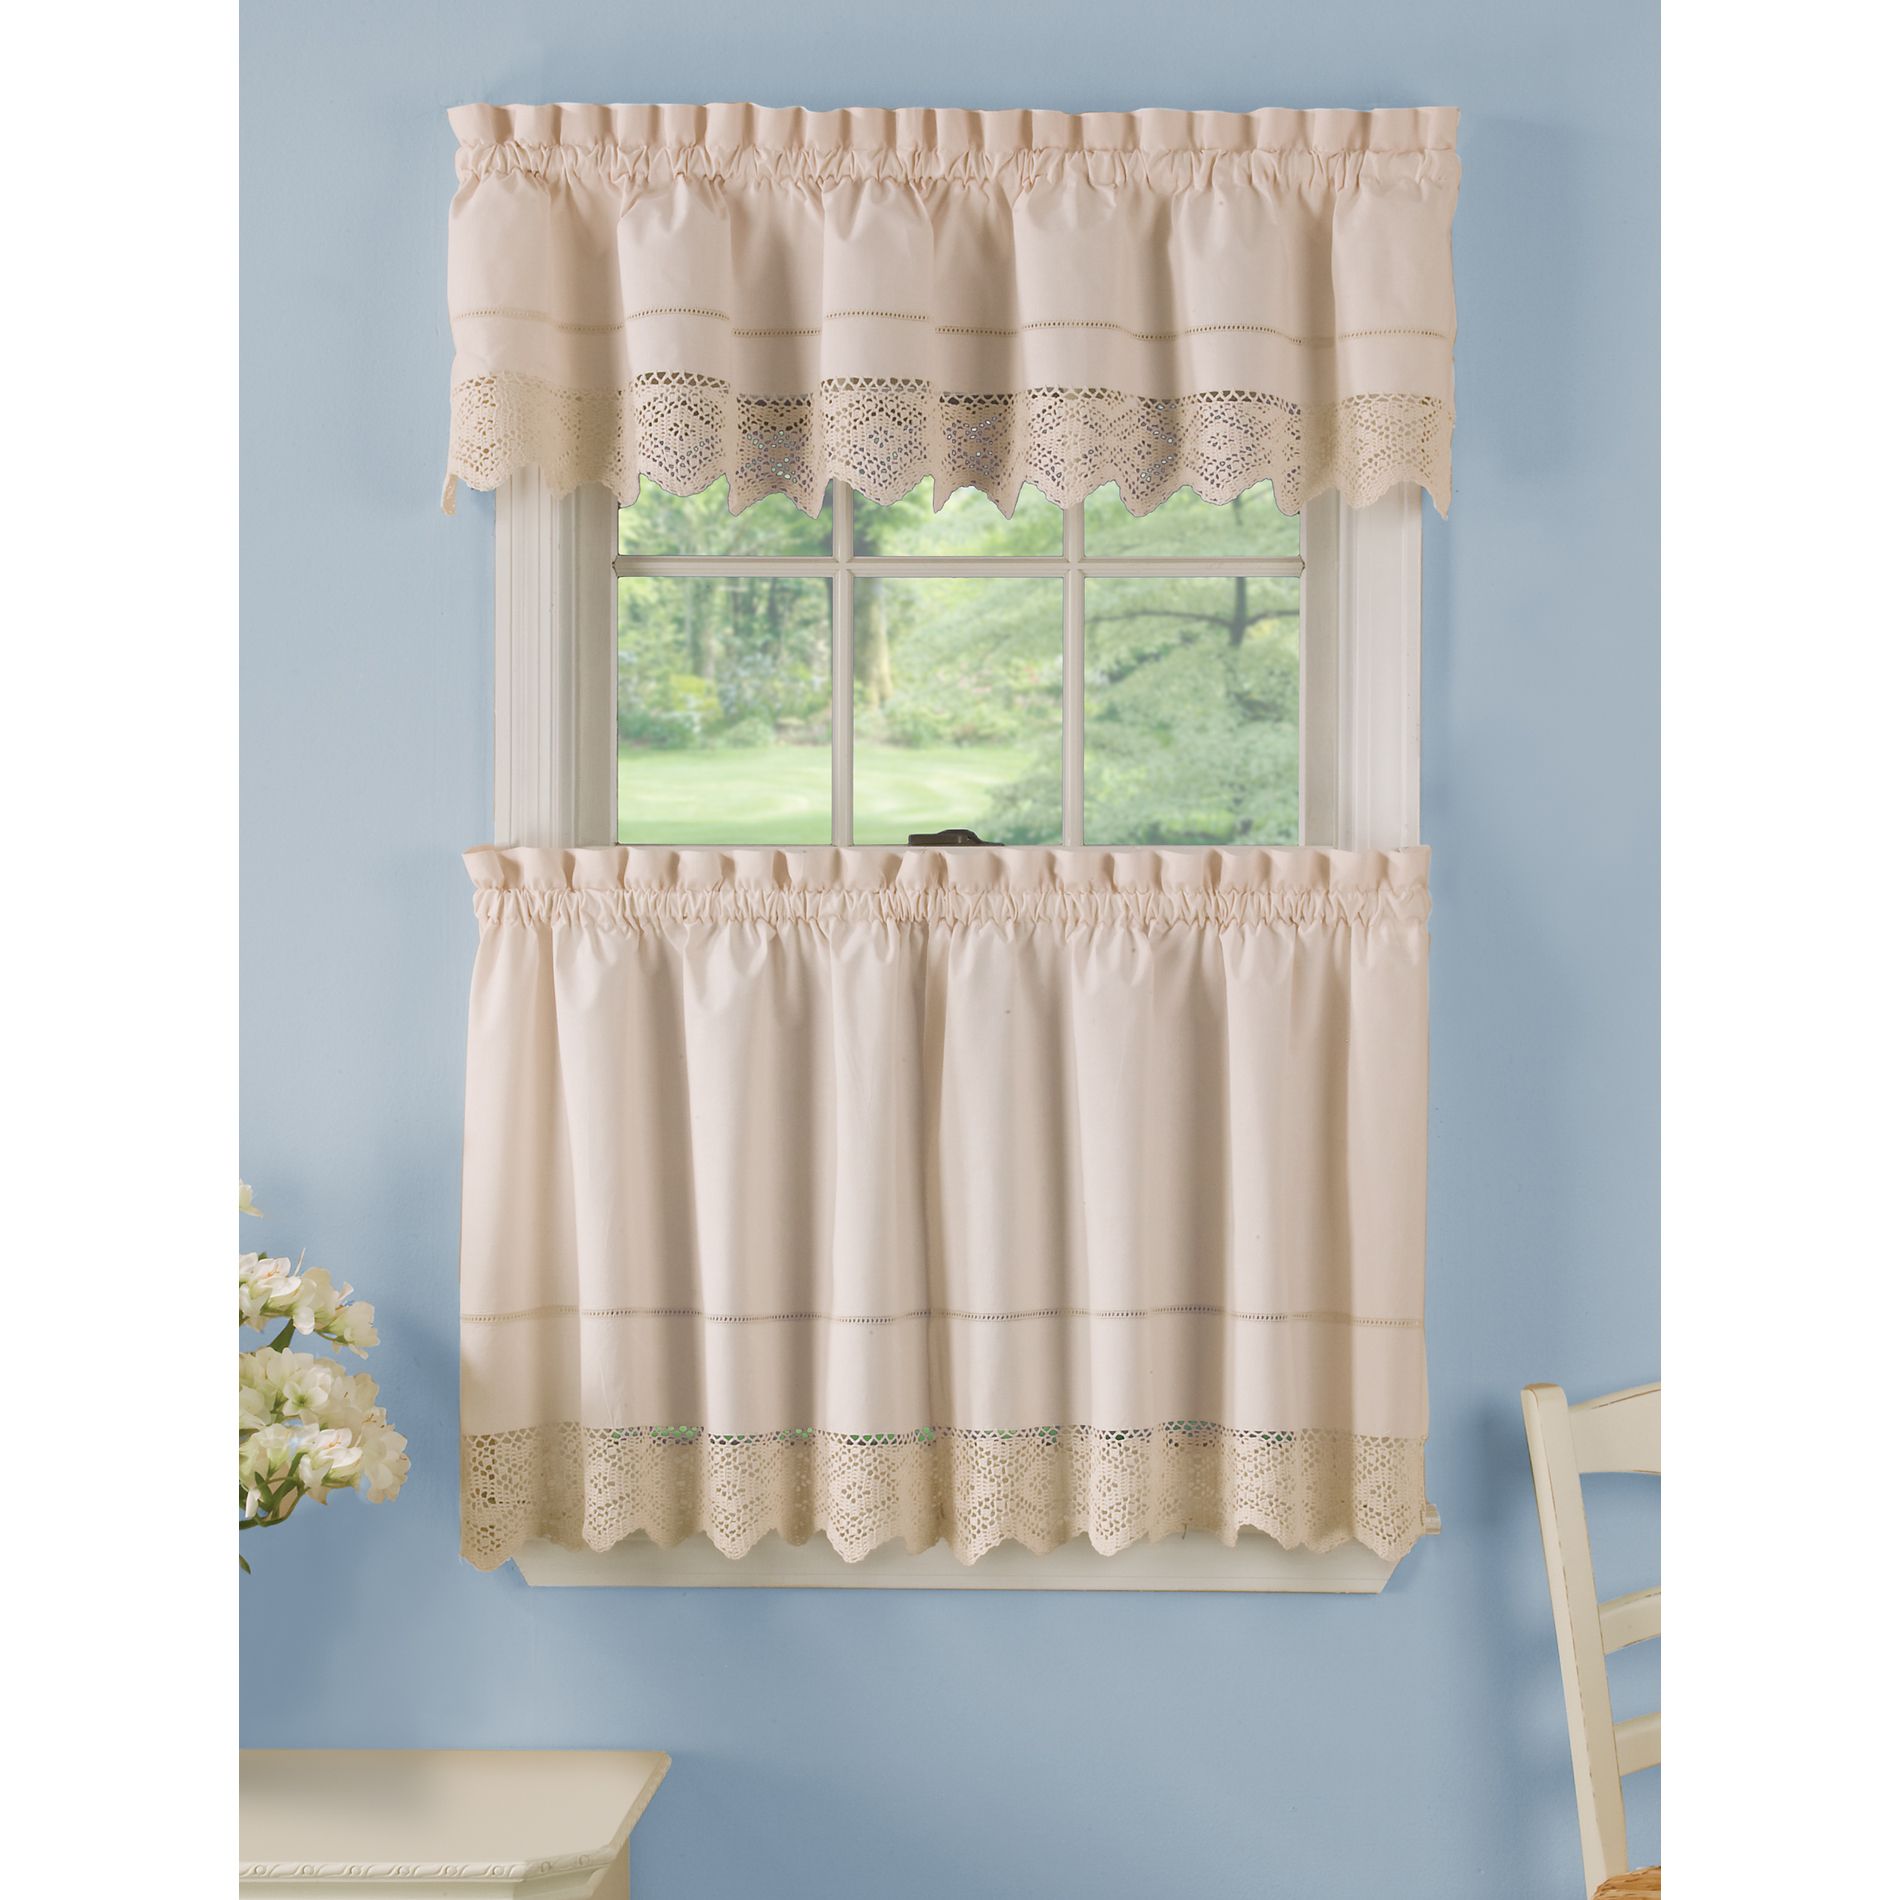 Essential Home Ivory Crochet Tier Curtains